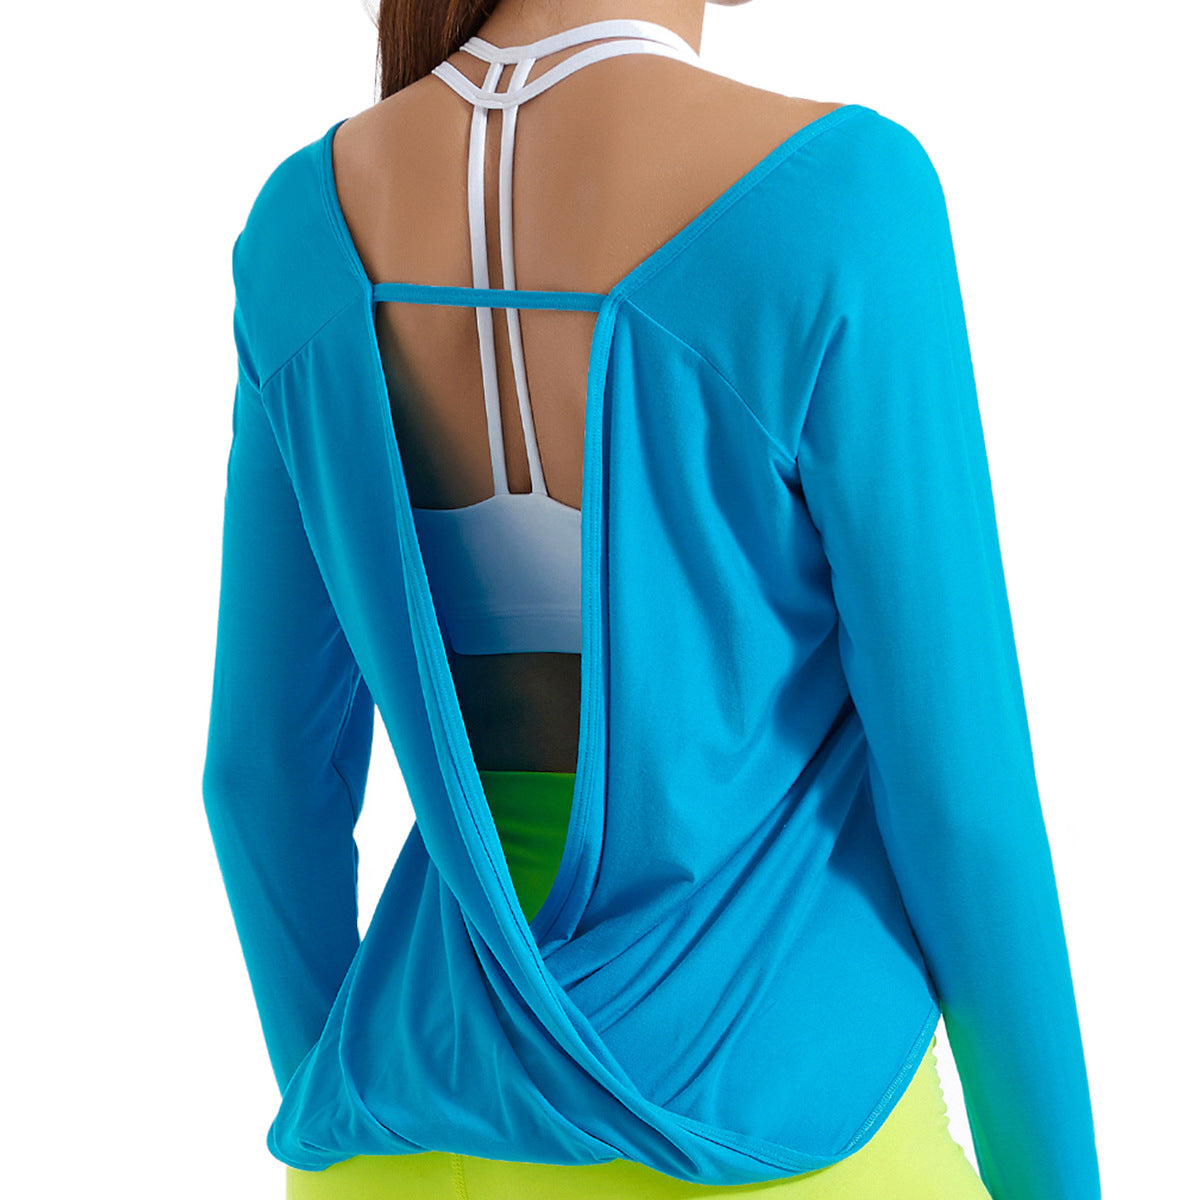 Sportswear Women Loose Breathable Pro Workout Clothes Aerobics Running Yoga Clothing